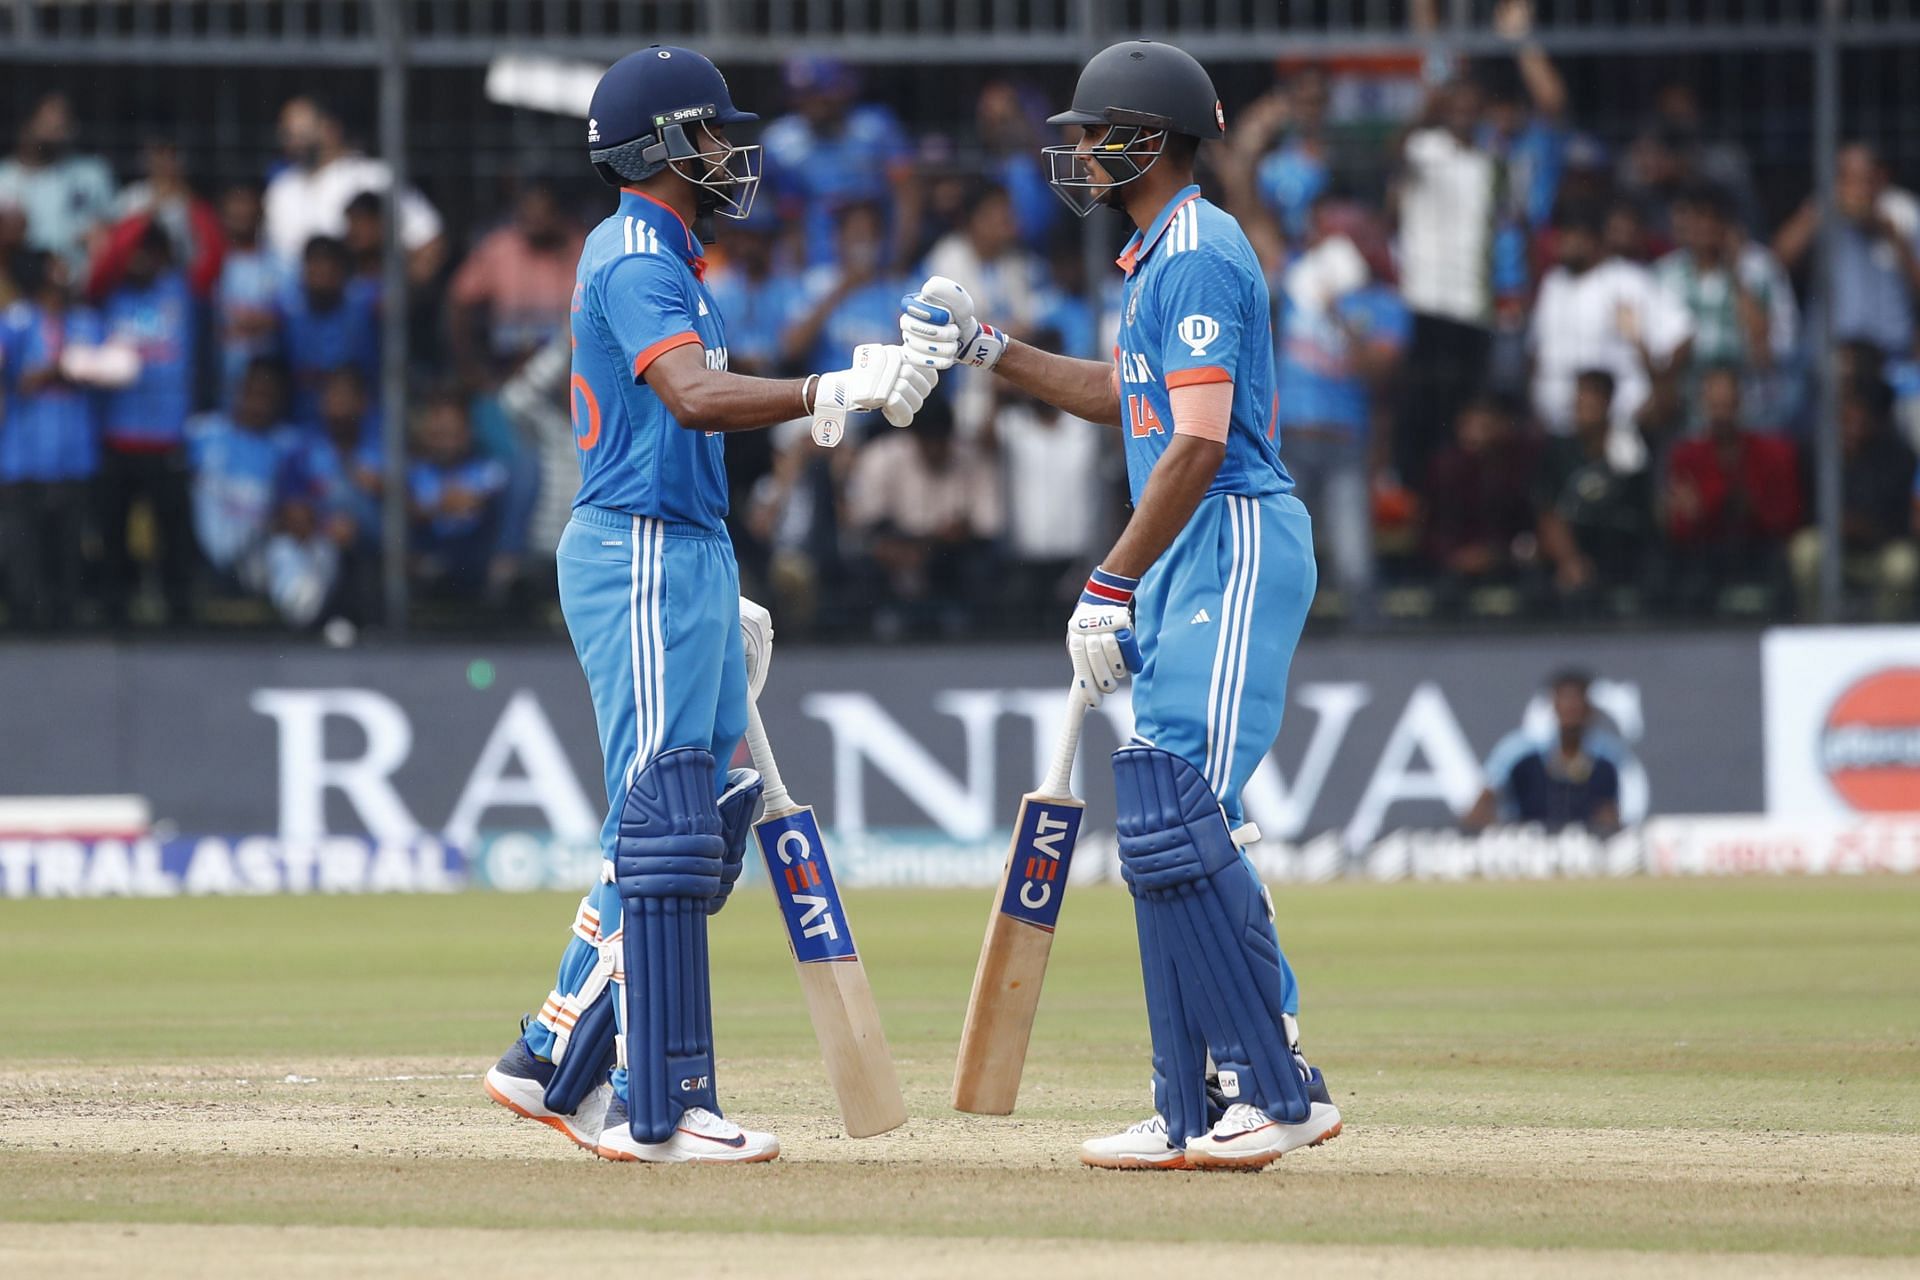 Both Shreyas Iyer and Shubman Gill scored blazing hundreds in Indore [Getty Images]